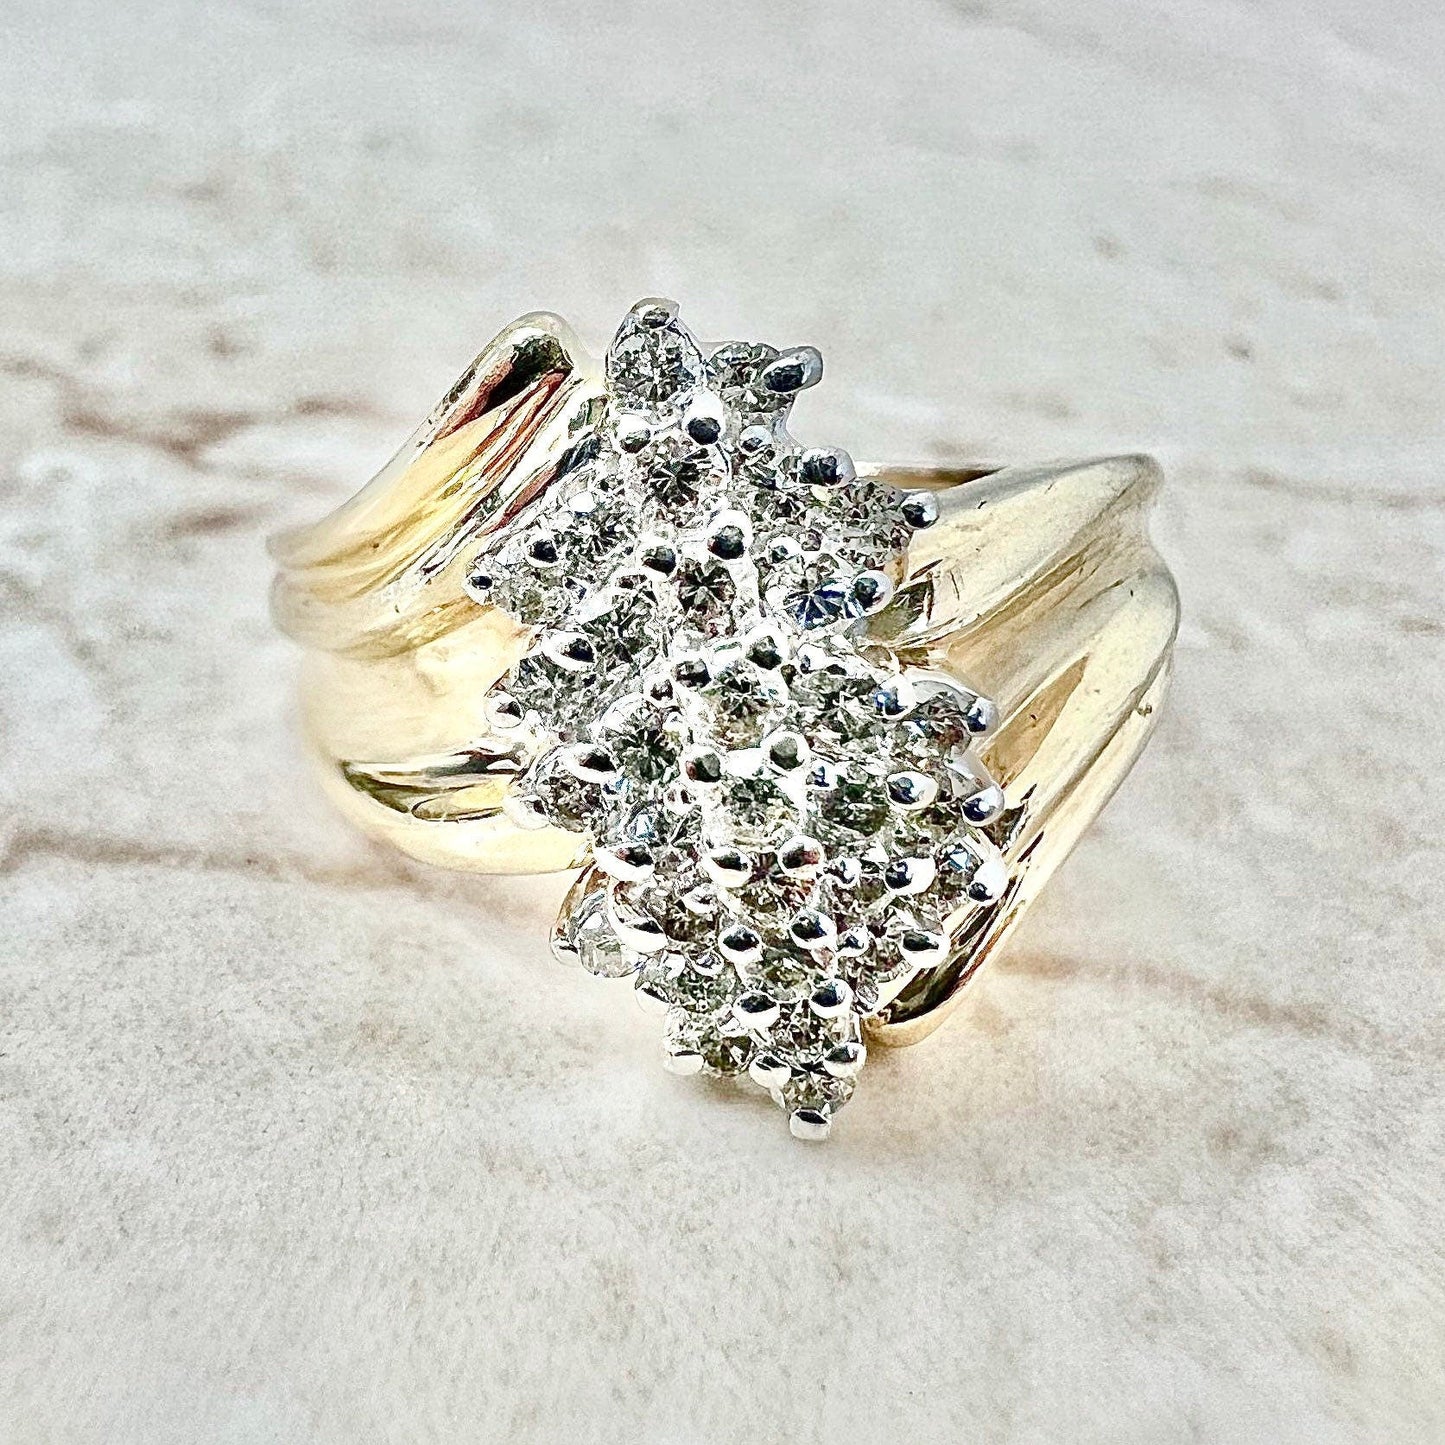 Vintage Diamond Cluster Ring - 14K Yellow Gold Diamond Cocktail Ring - Bypass Diamond Ring - 14K Gold Ring -Statement Ring-Anniversary Gifts